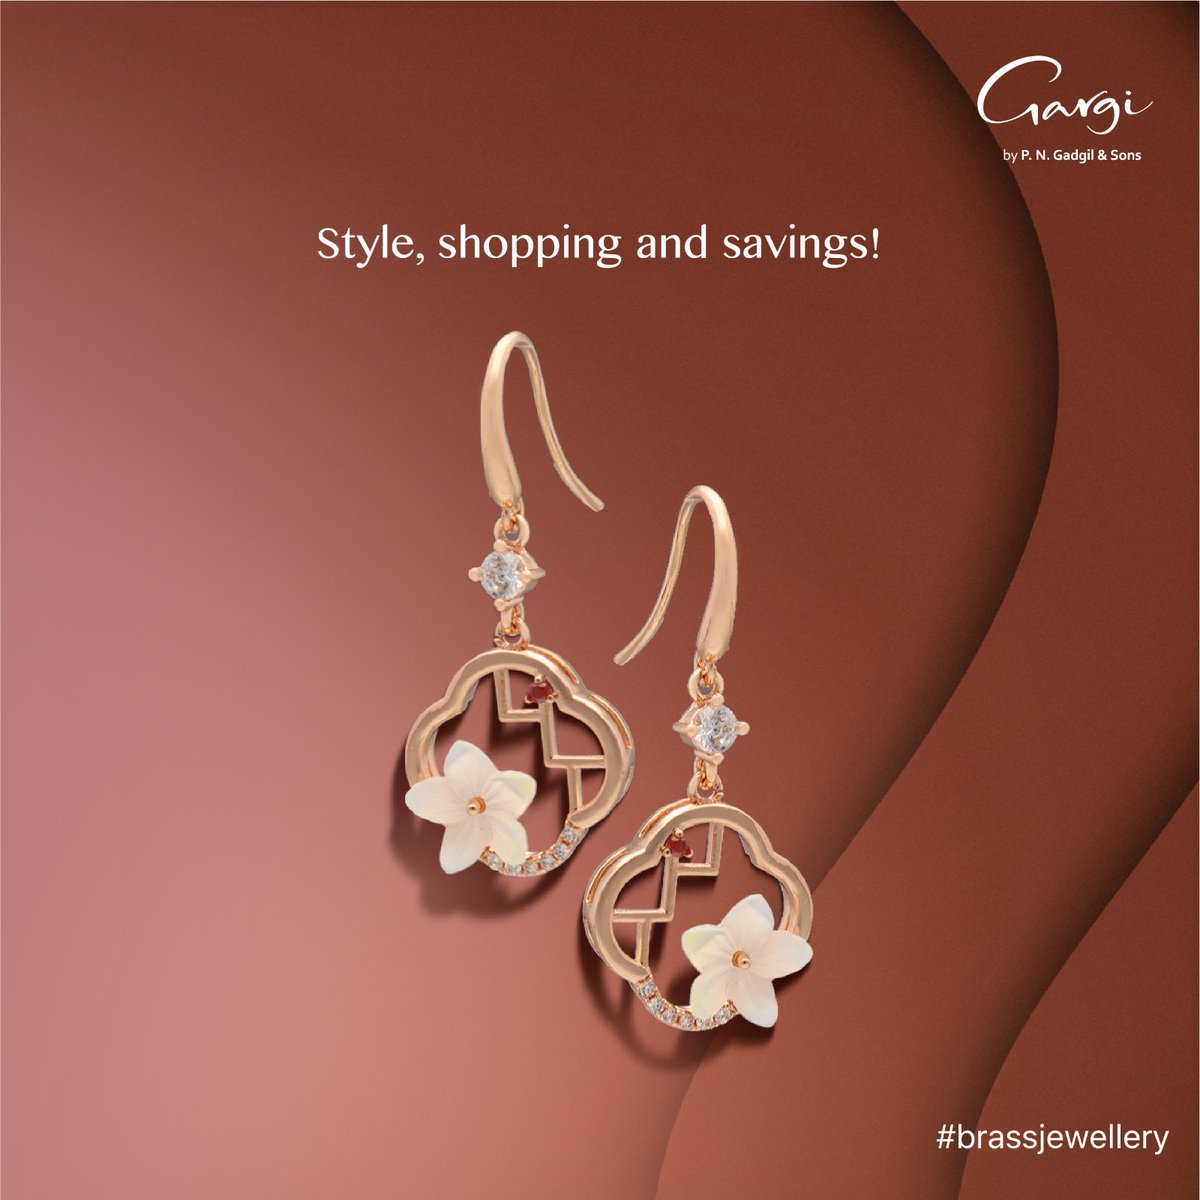 Unleash the shopper in you! Dive into a world of style and savings with Gargi's Jewellery – now at Flat 25% off. 

#GargiTurns2 #style #stylingdiaries #offers #shopping #brassjewellery